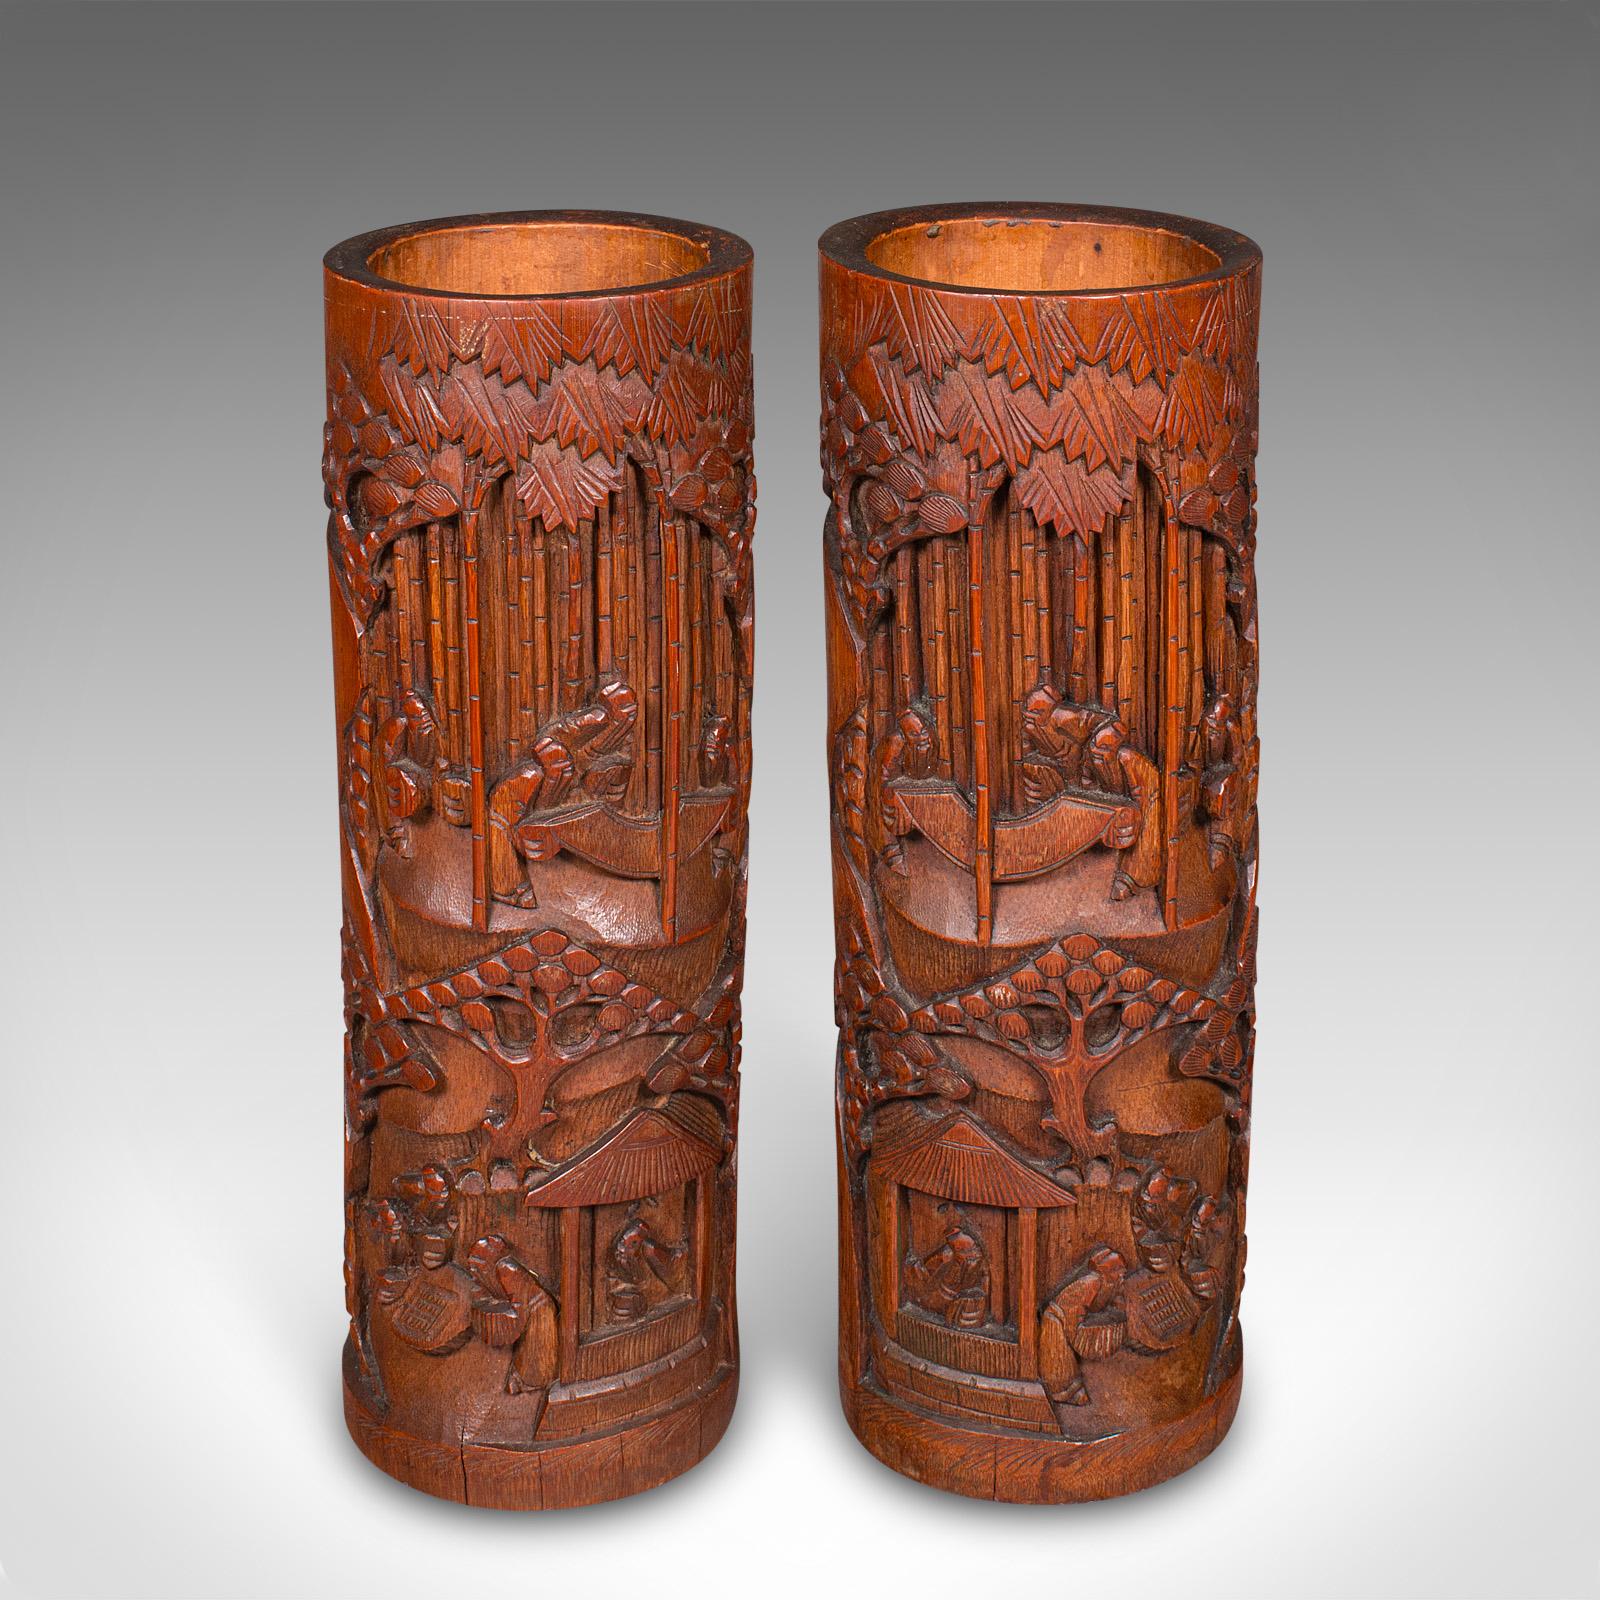 This is a tall pair of antique brush pots. A Chinese, hand-carved bamboo bitong or flower vase, dating to the late Victorian period, circa 1880.

Fascinating bitong, or traditionally carved brush pots - ideal for dry flower arrangements
Displaying a